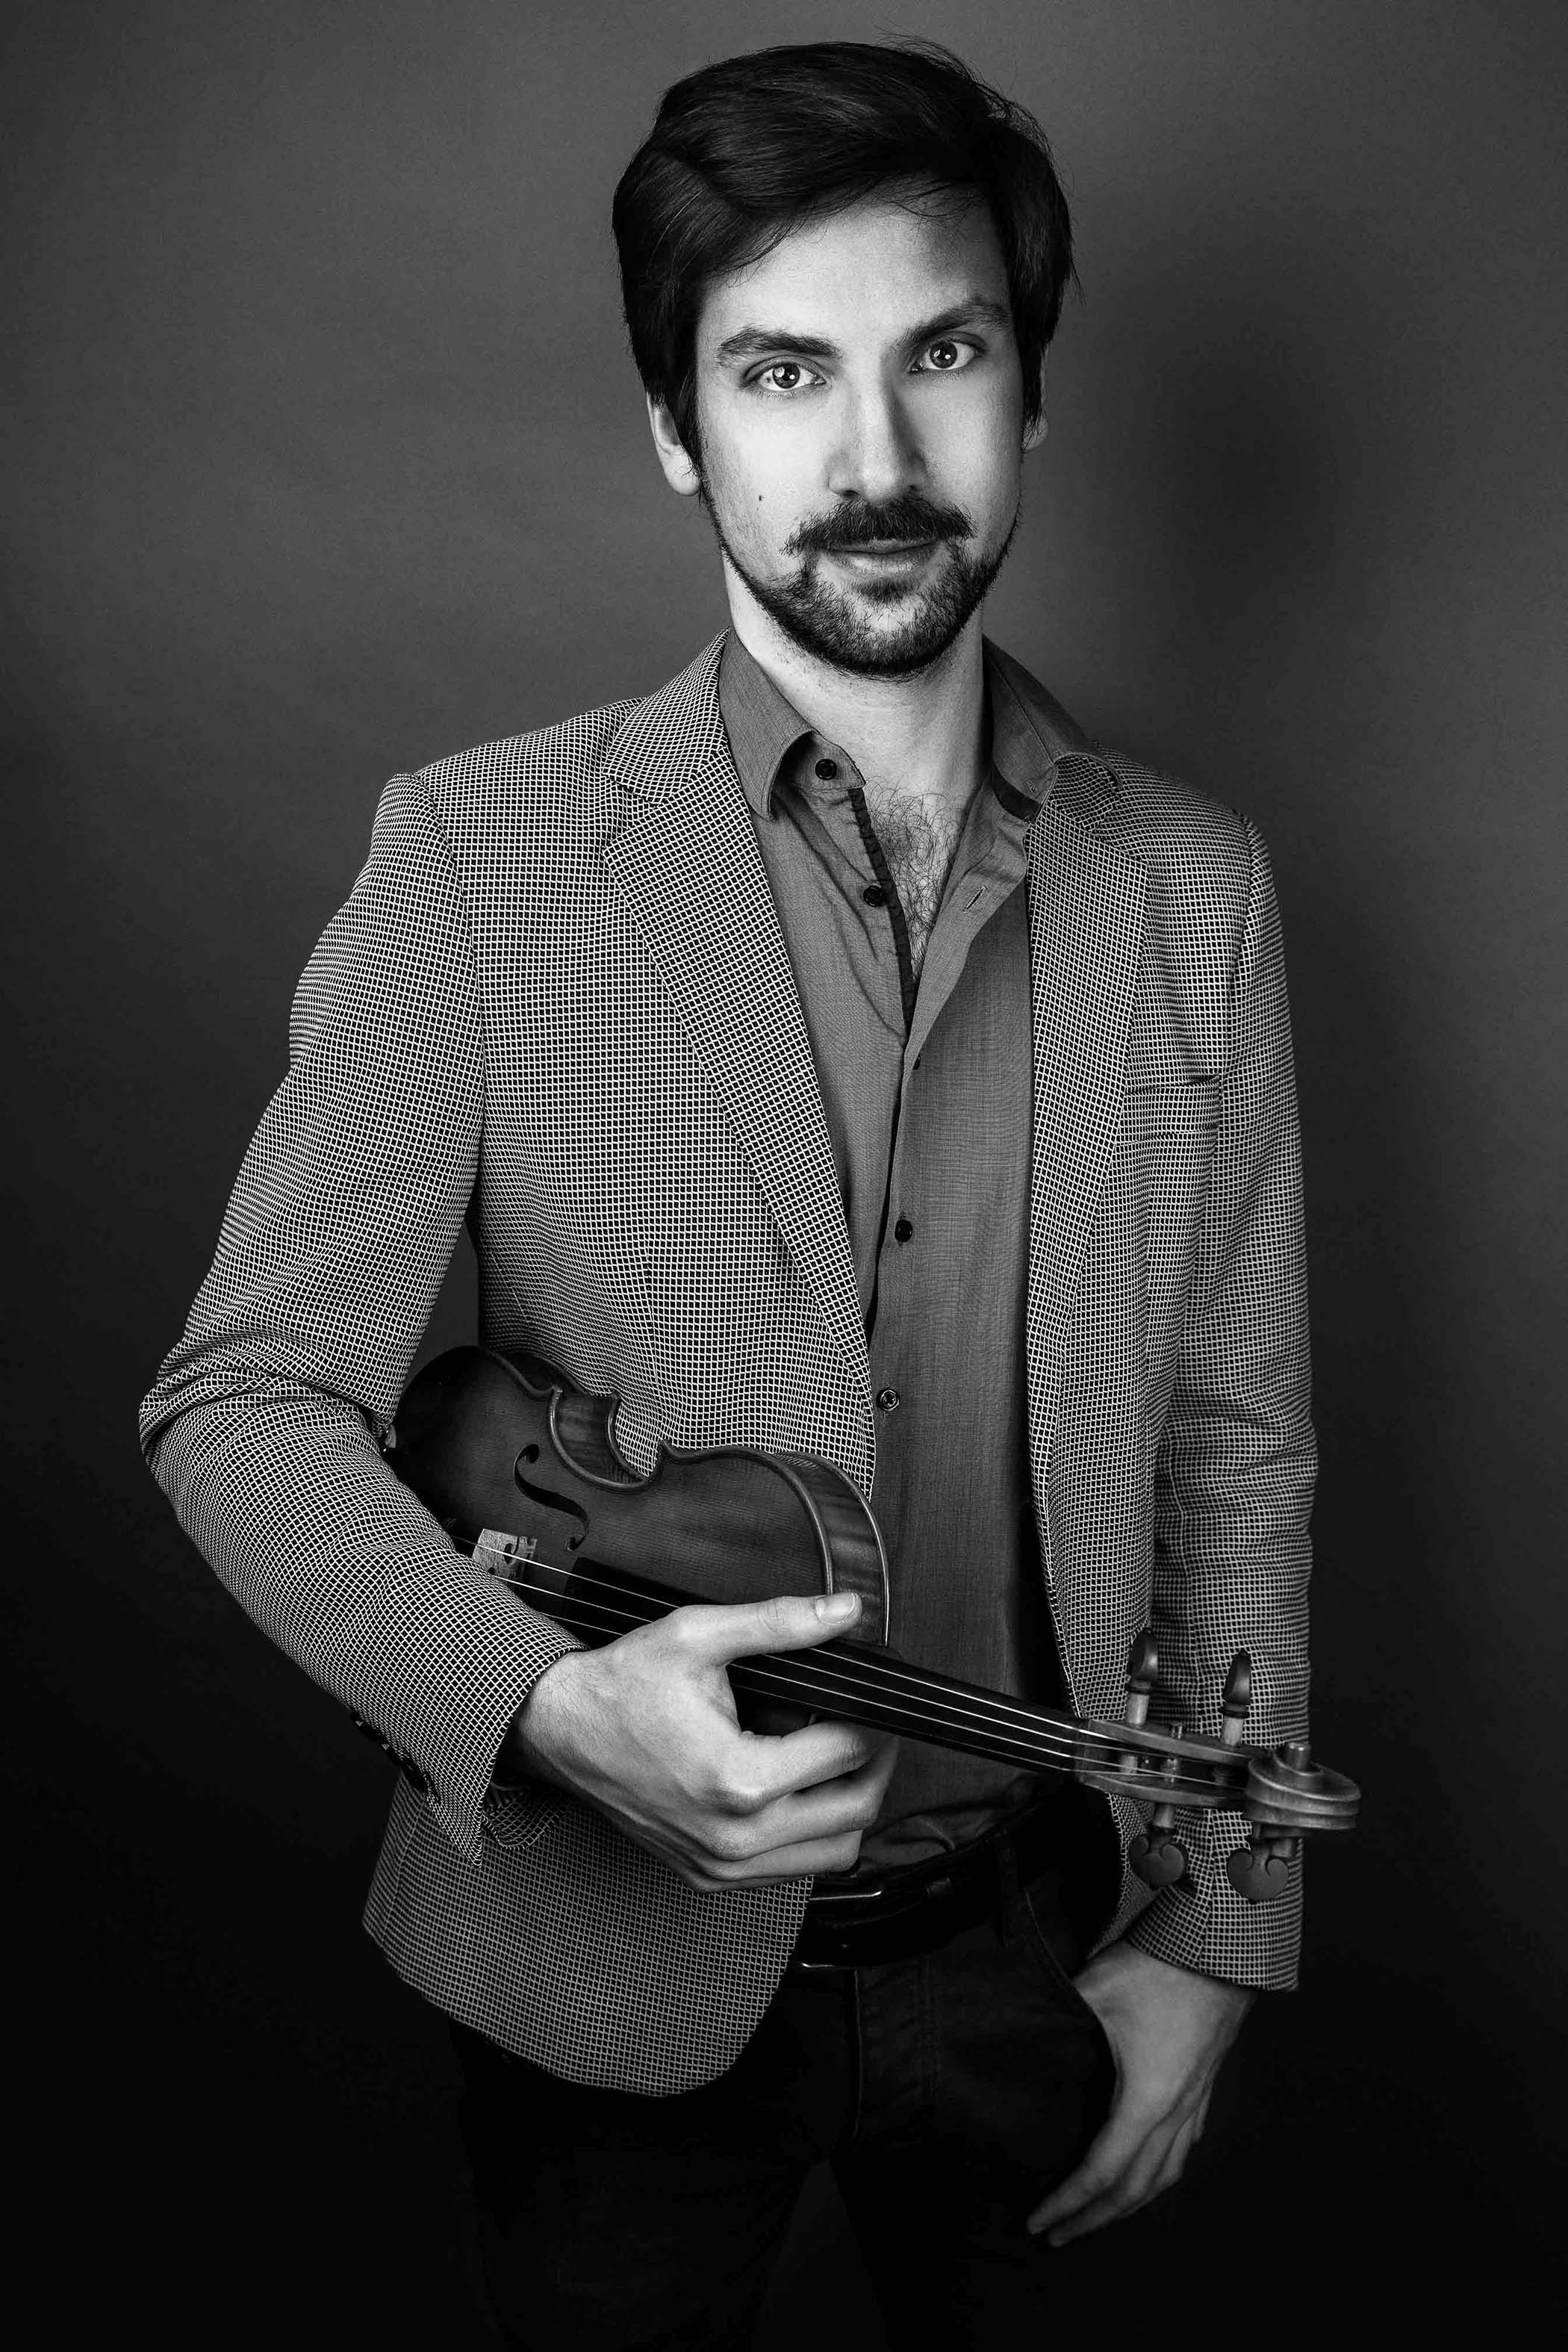 Violinist black and white portrait with his violin